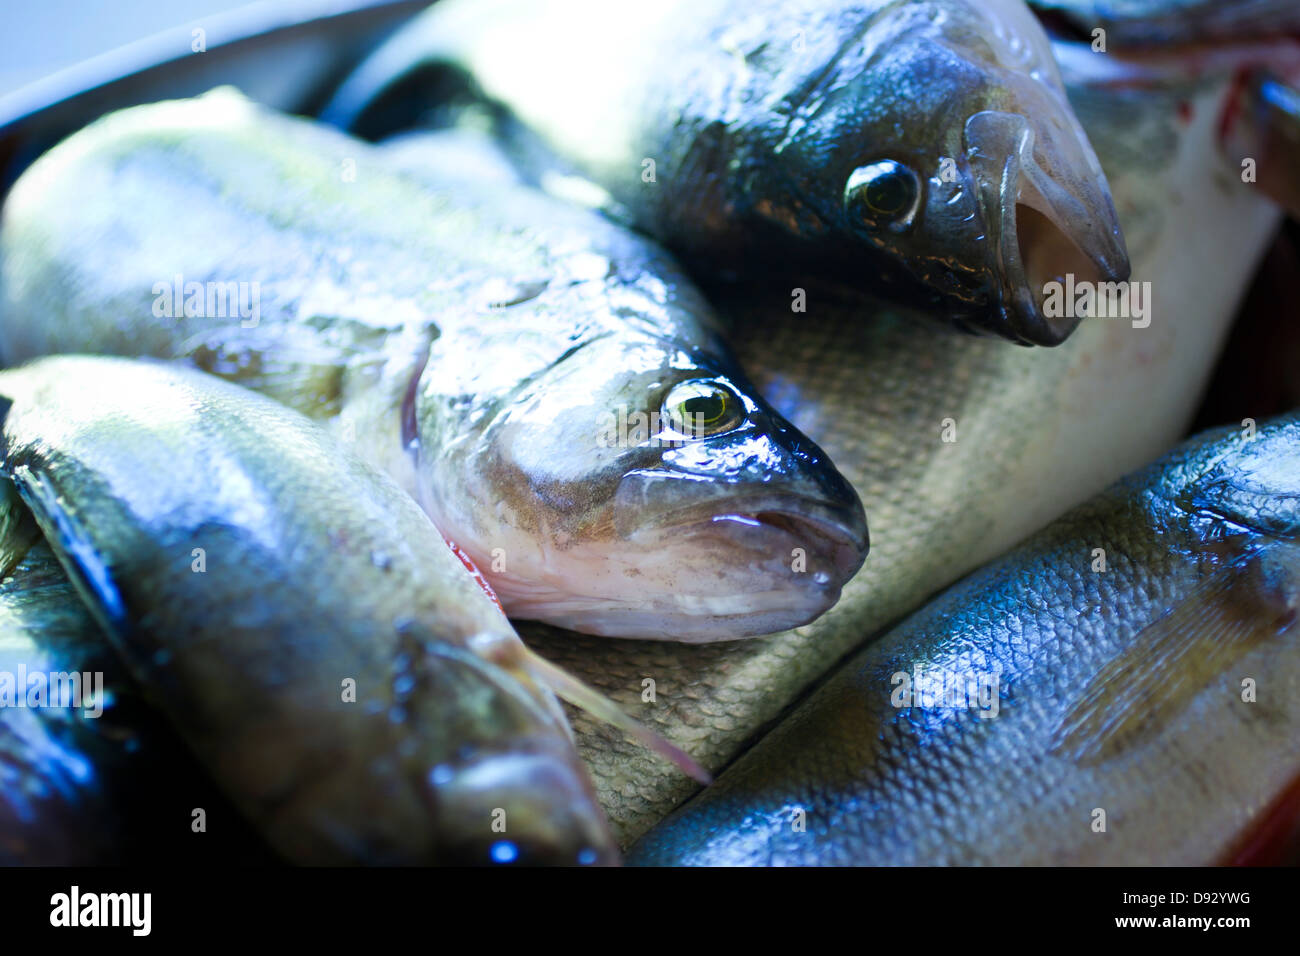 High angle view of dead fish Stock Photo